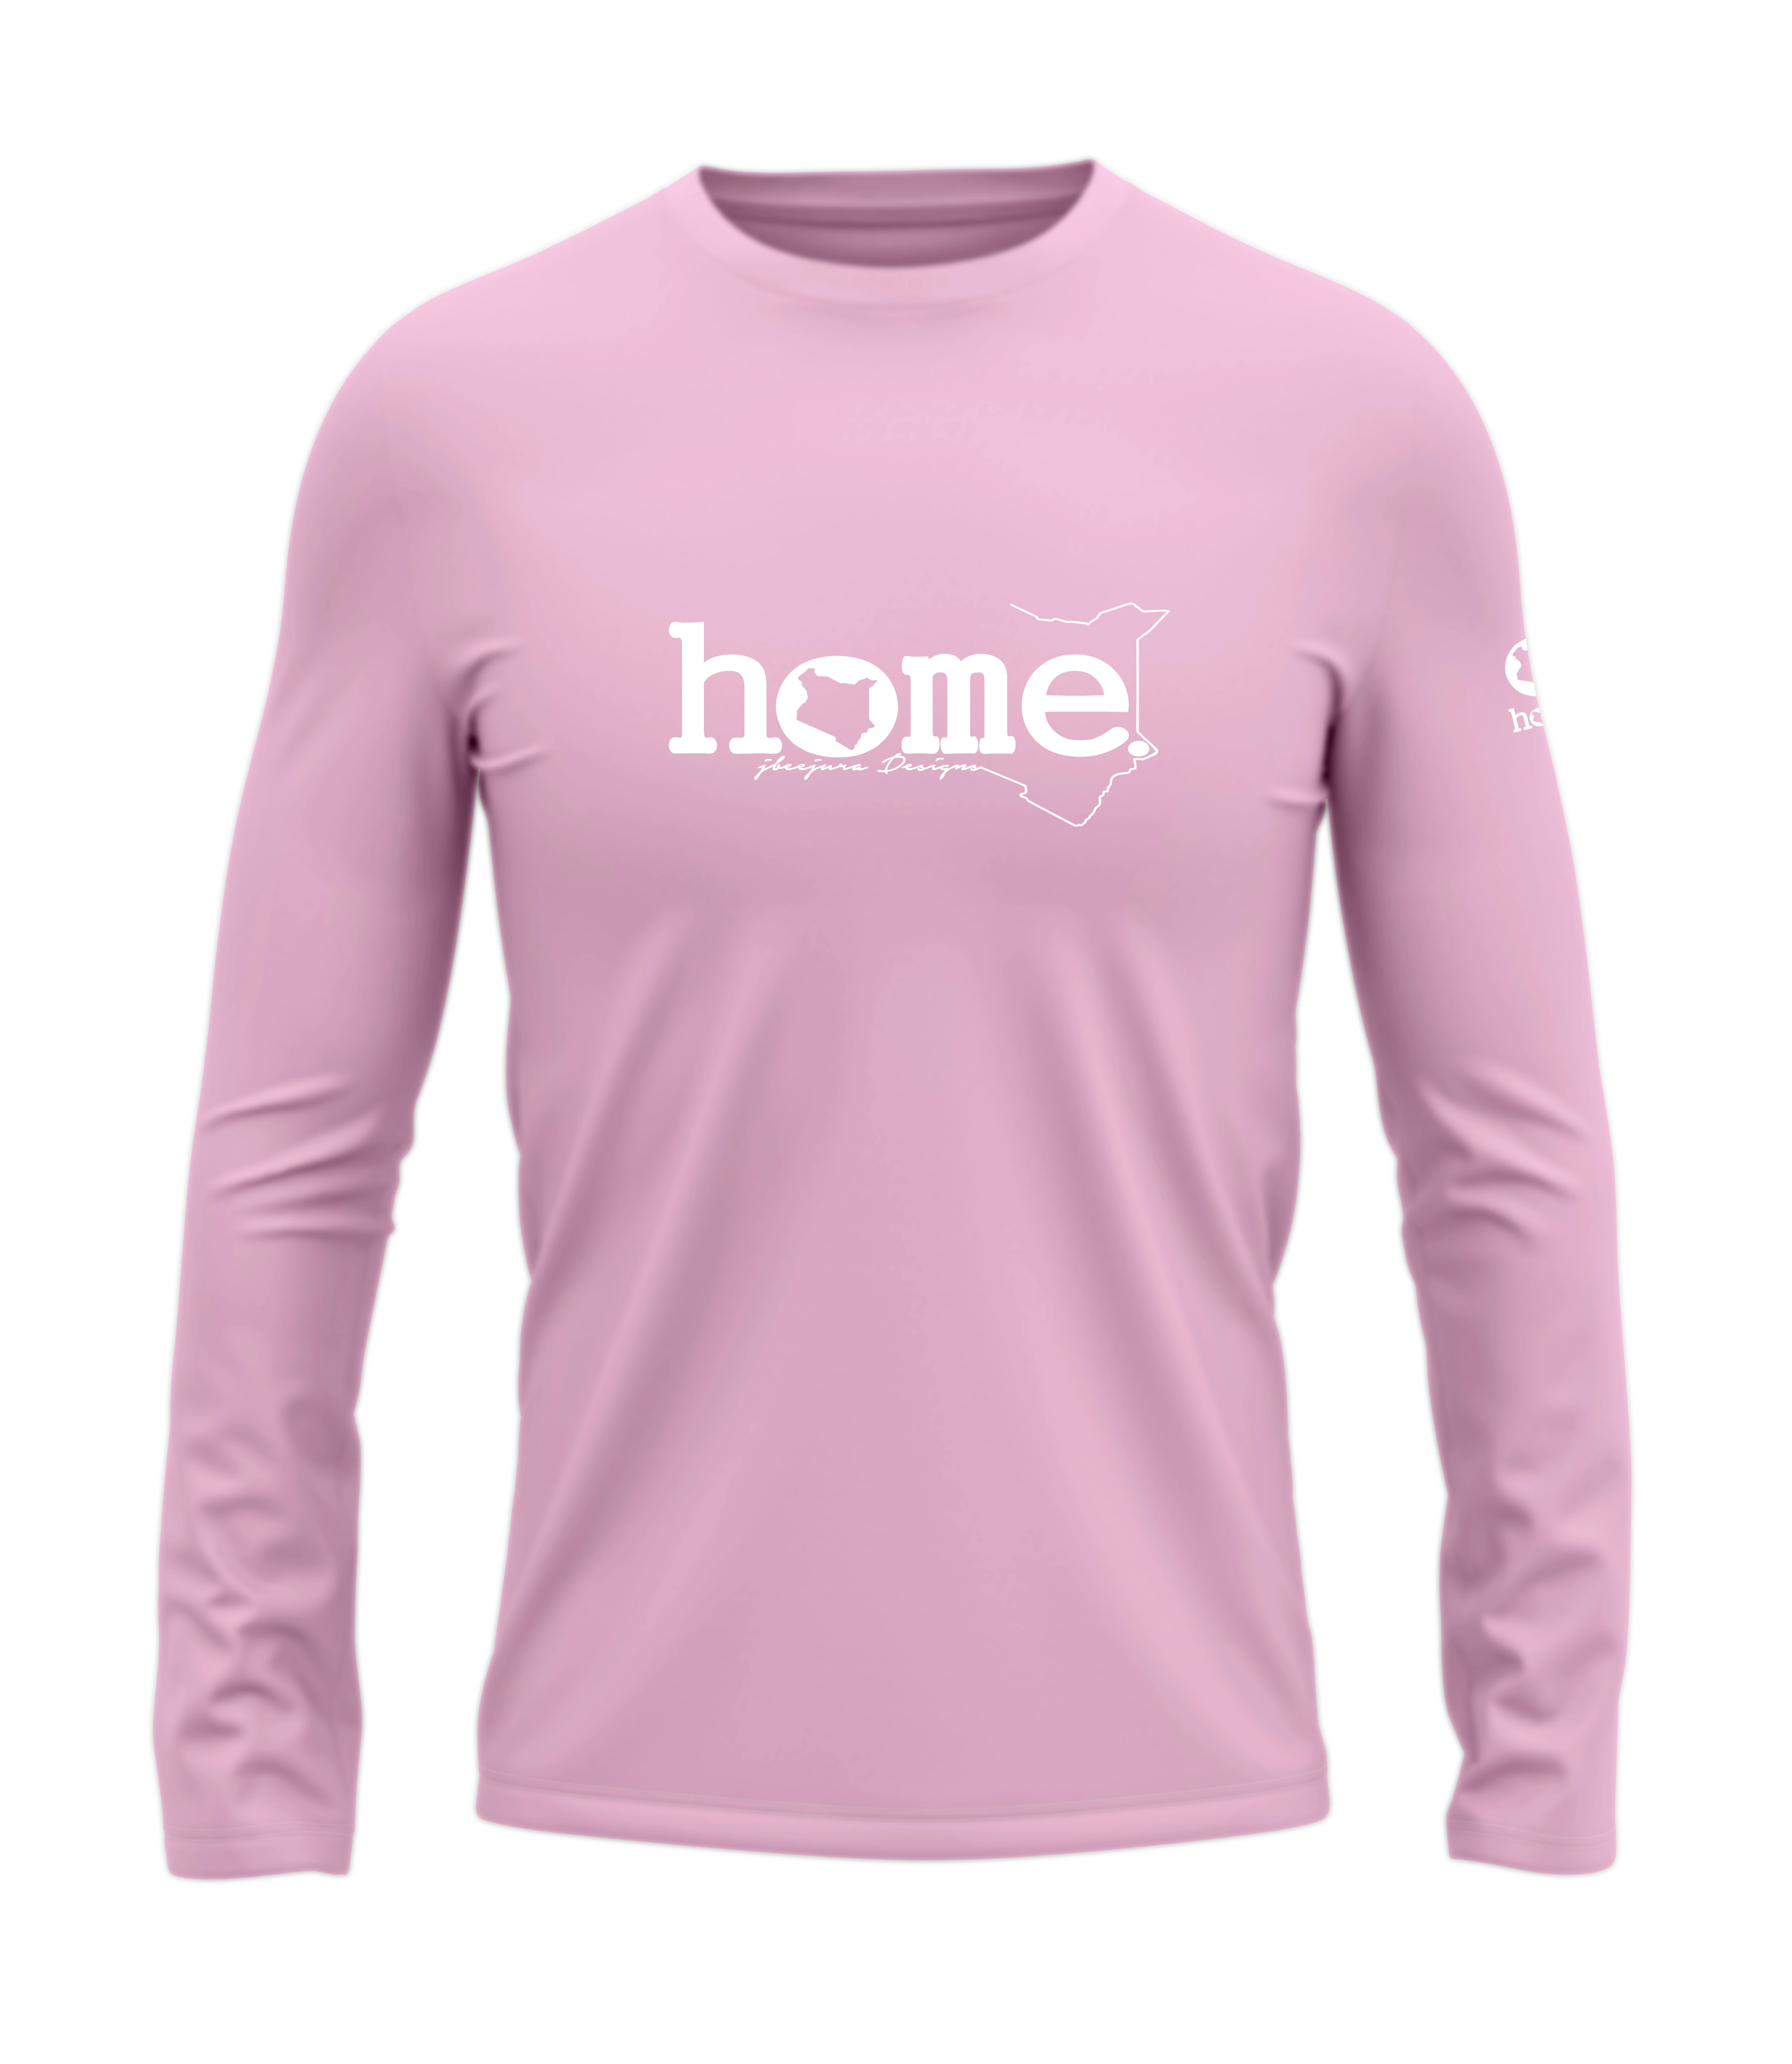 home_254 LONG-SLEEVED PINK T-SHIRT WITH A WHITE CLASSIC WORDS PRINT – COTTON PLUS FABRIC